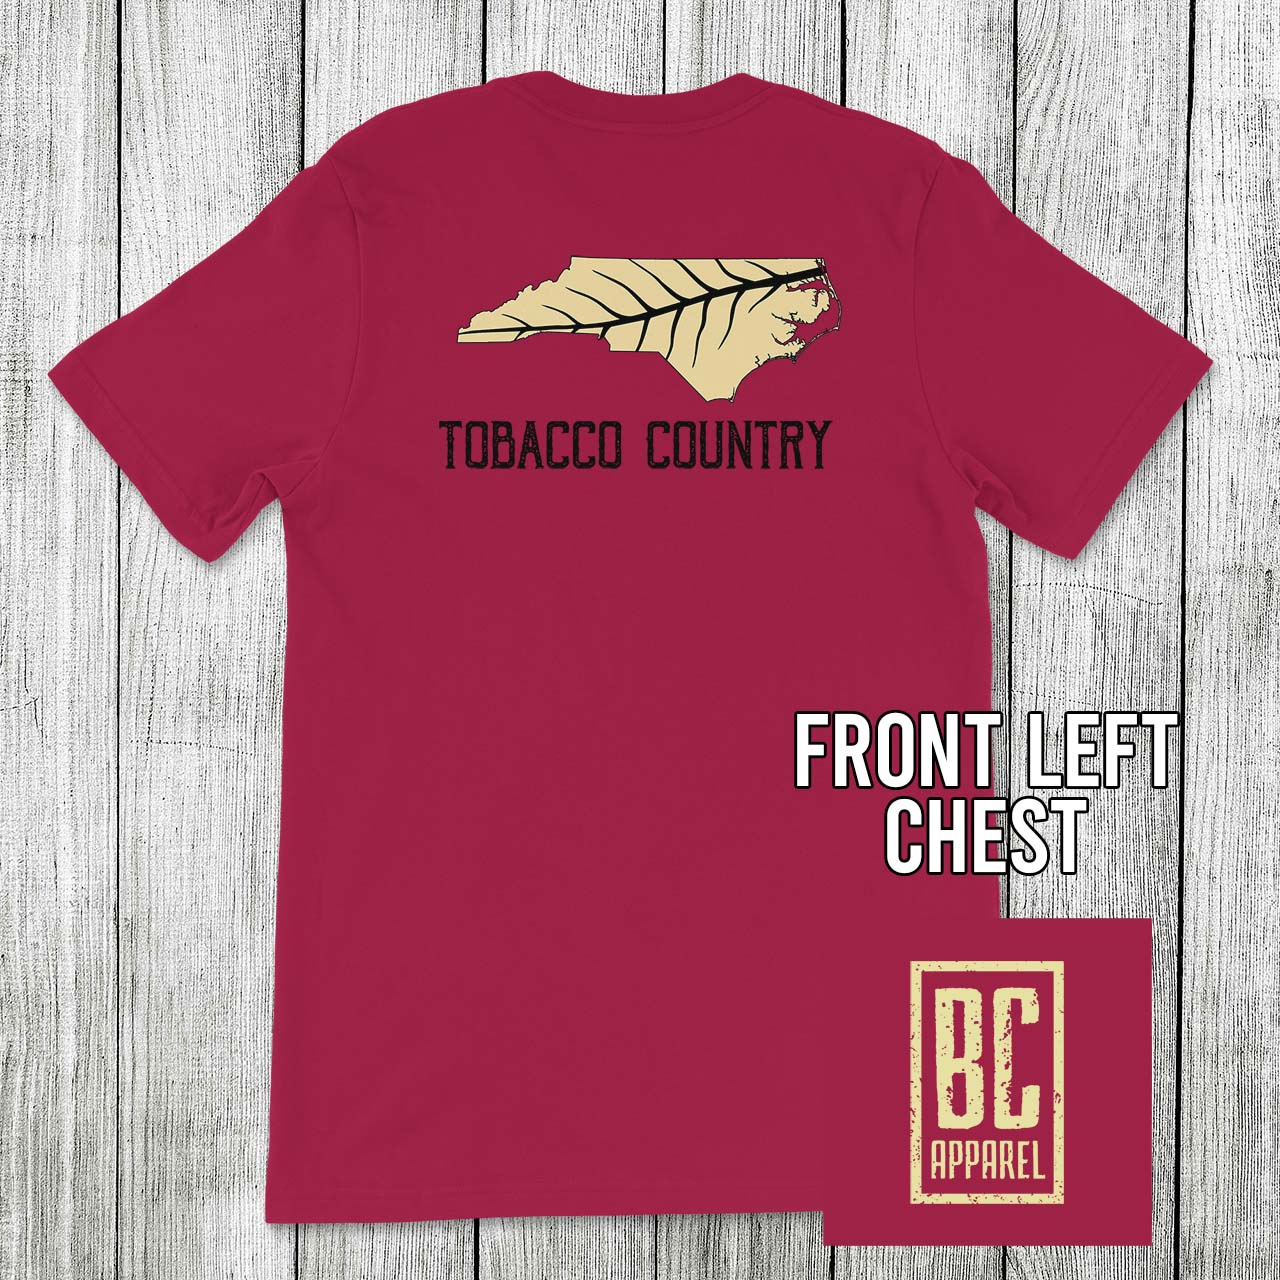 Tobacco Country